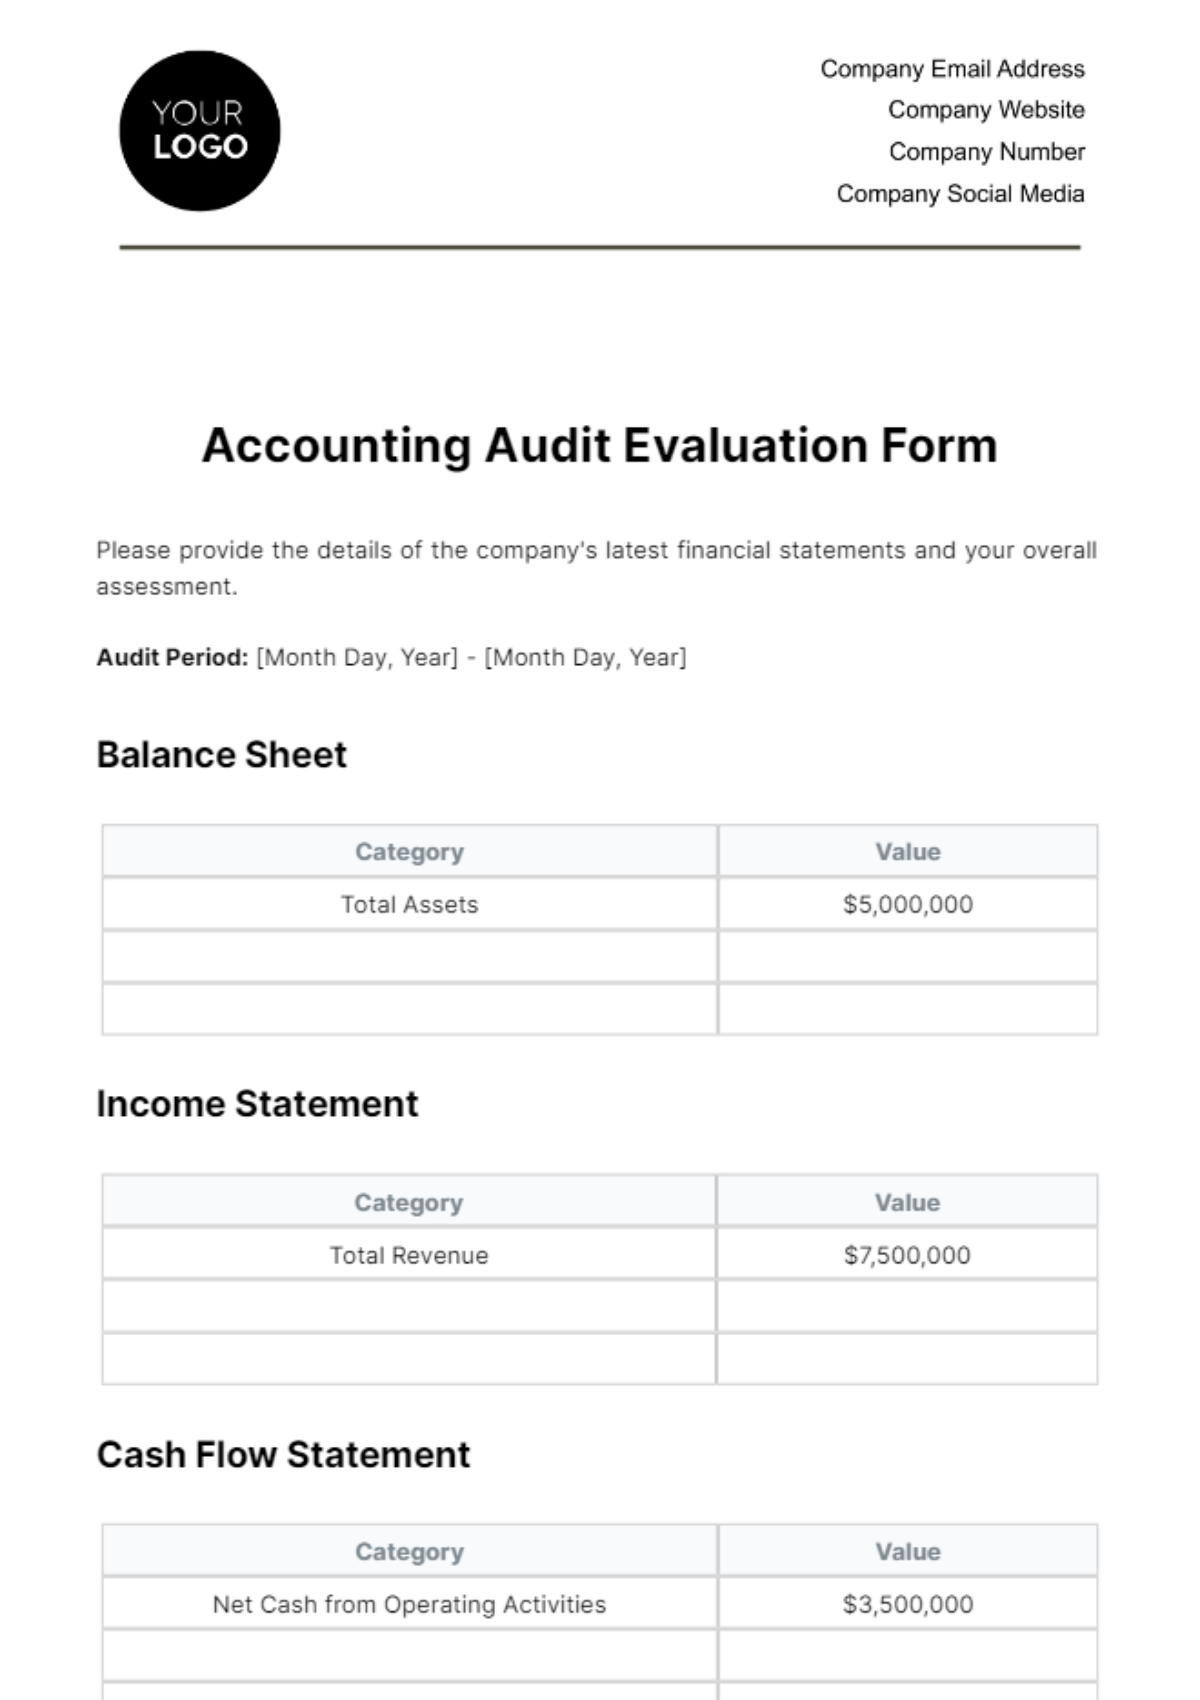 Accounting Audit Evaluation Form Template